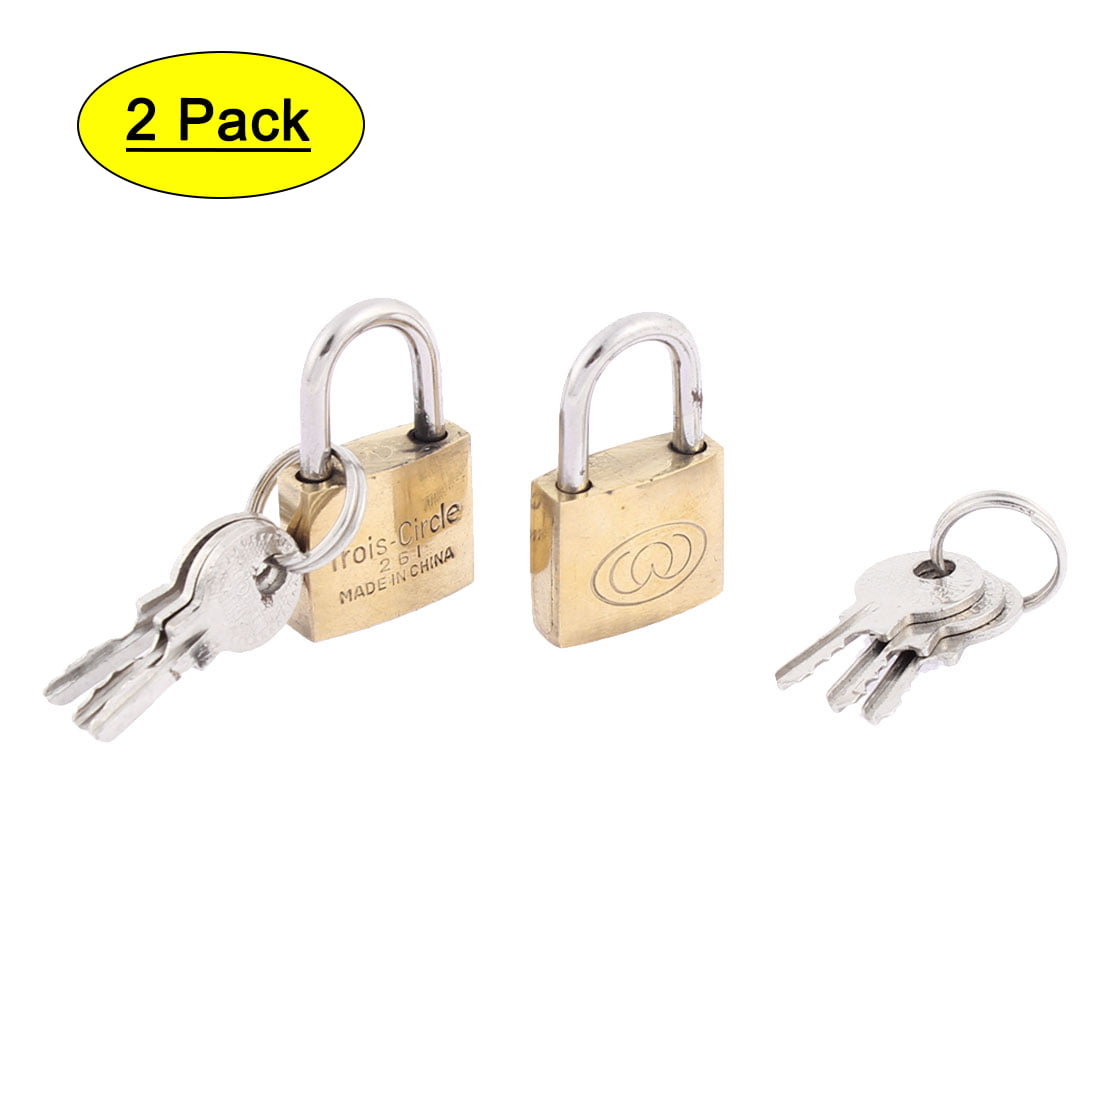 3 X 20mm BRASS SMALL SECURITY PADLOCKS TRAVEL LUGGAGE SUITCASES LOCKERS 